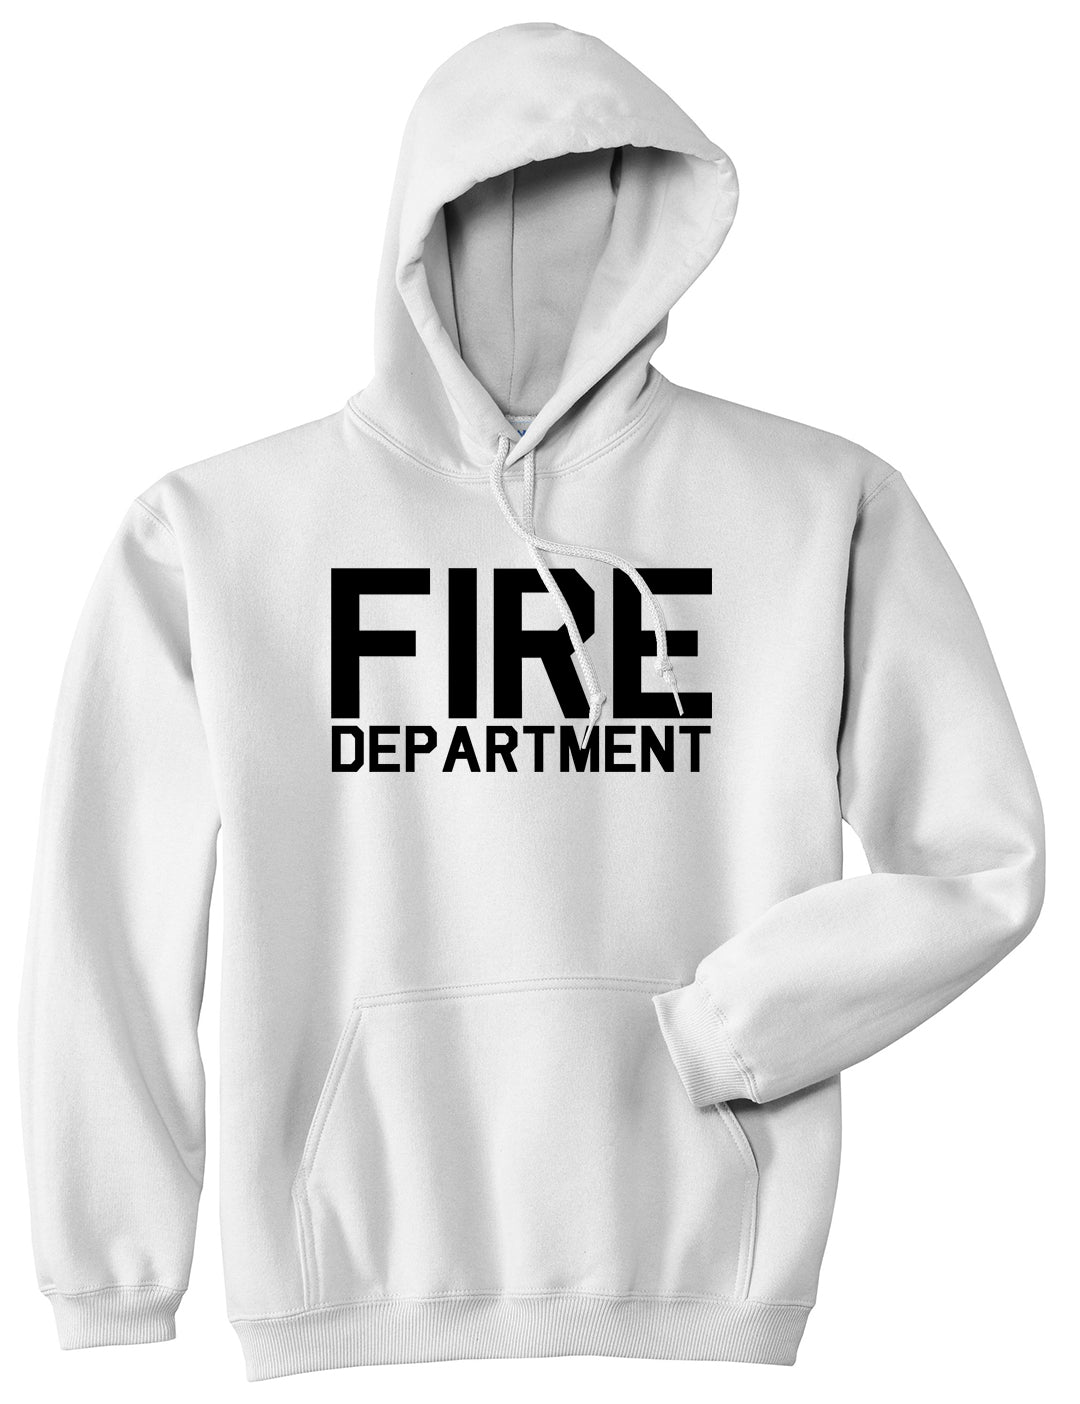 Fire Department Dept Mens White Pullover Hoodie by KINGS OF NY